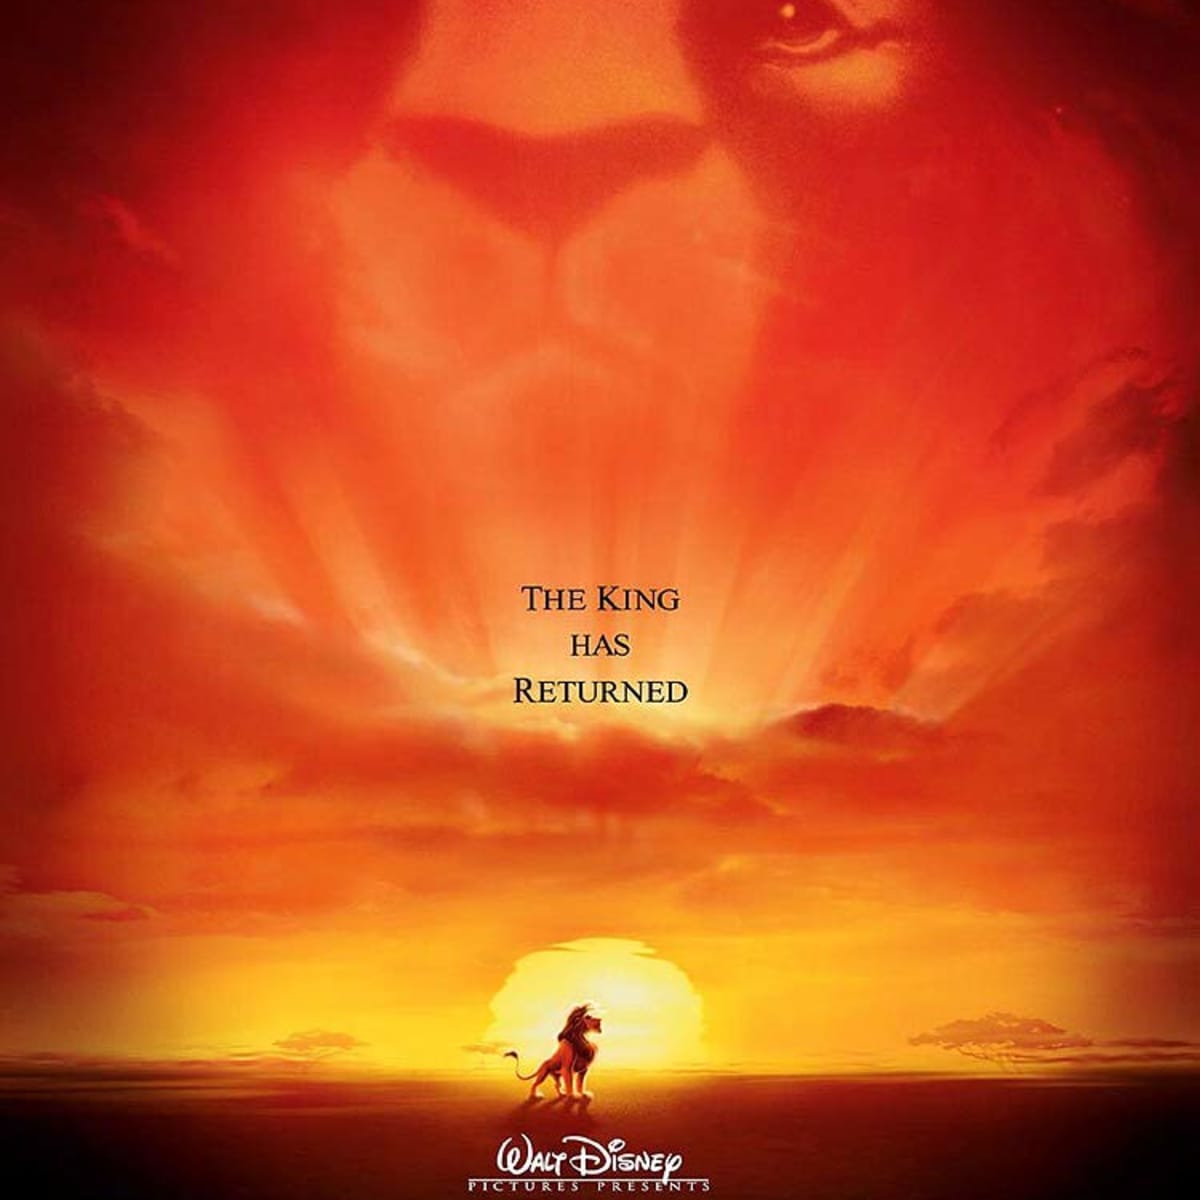 The return of Simba: the first trailer for The Lion King is released